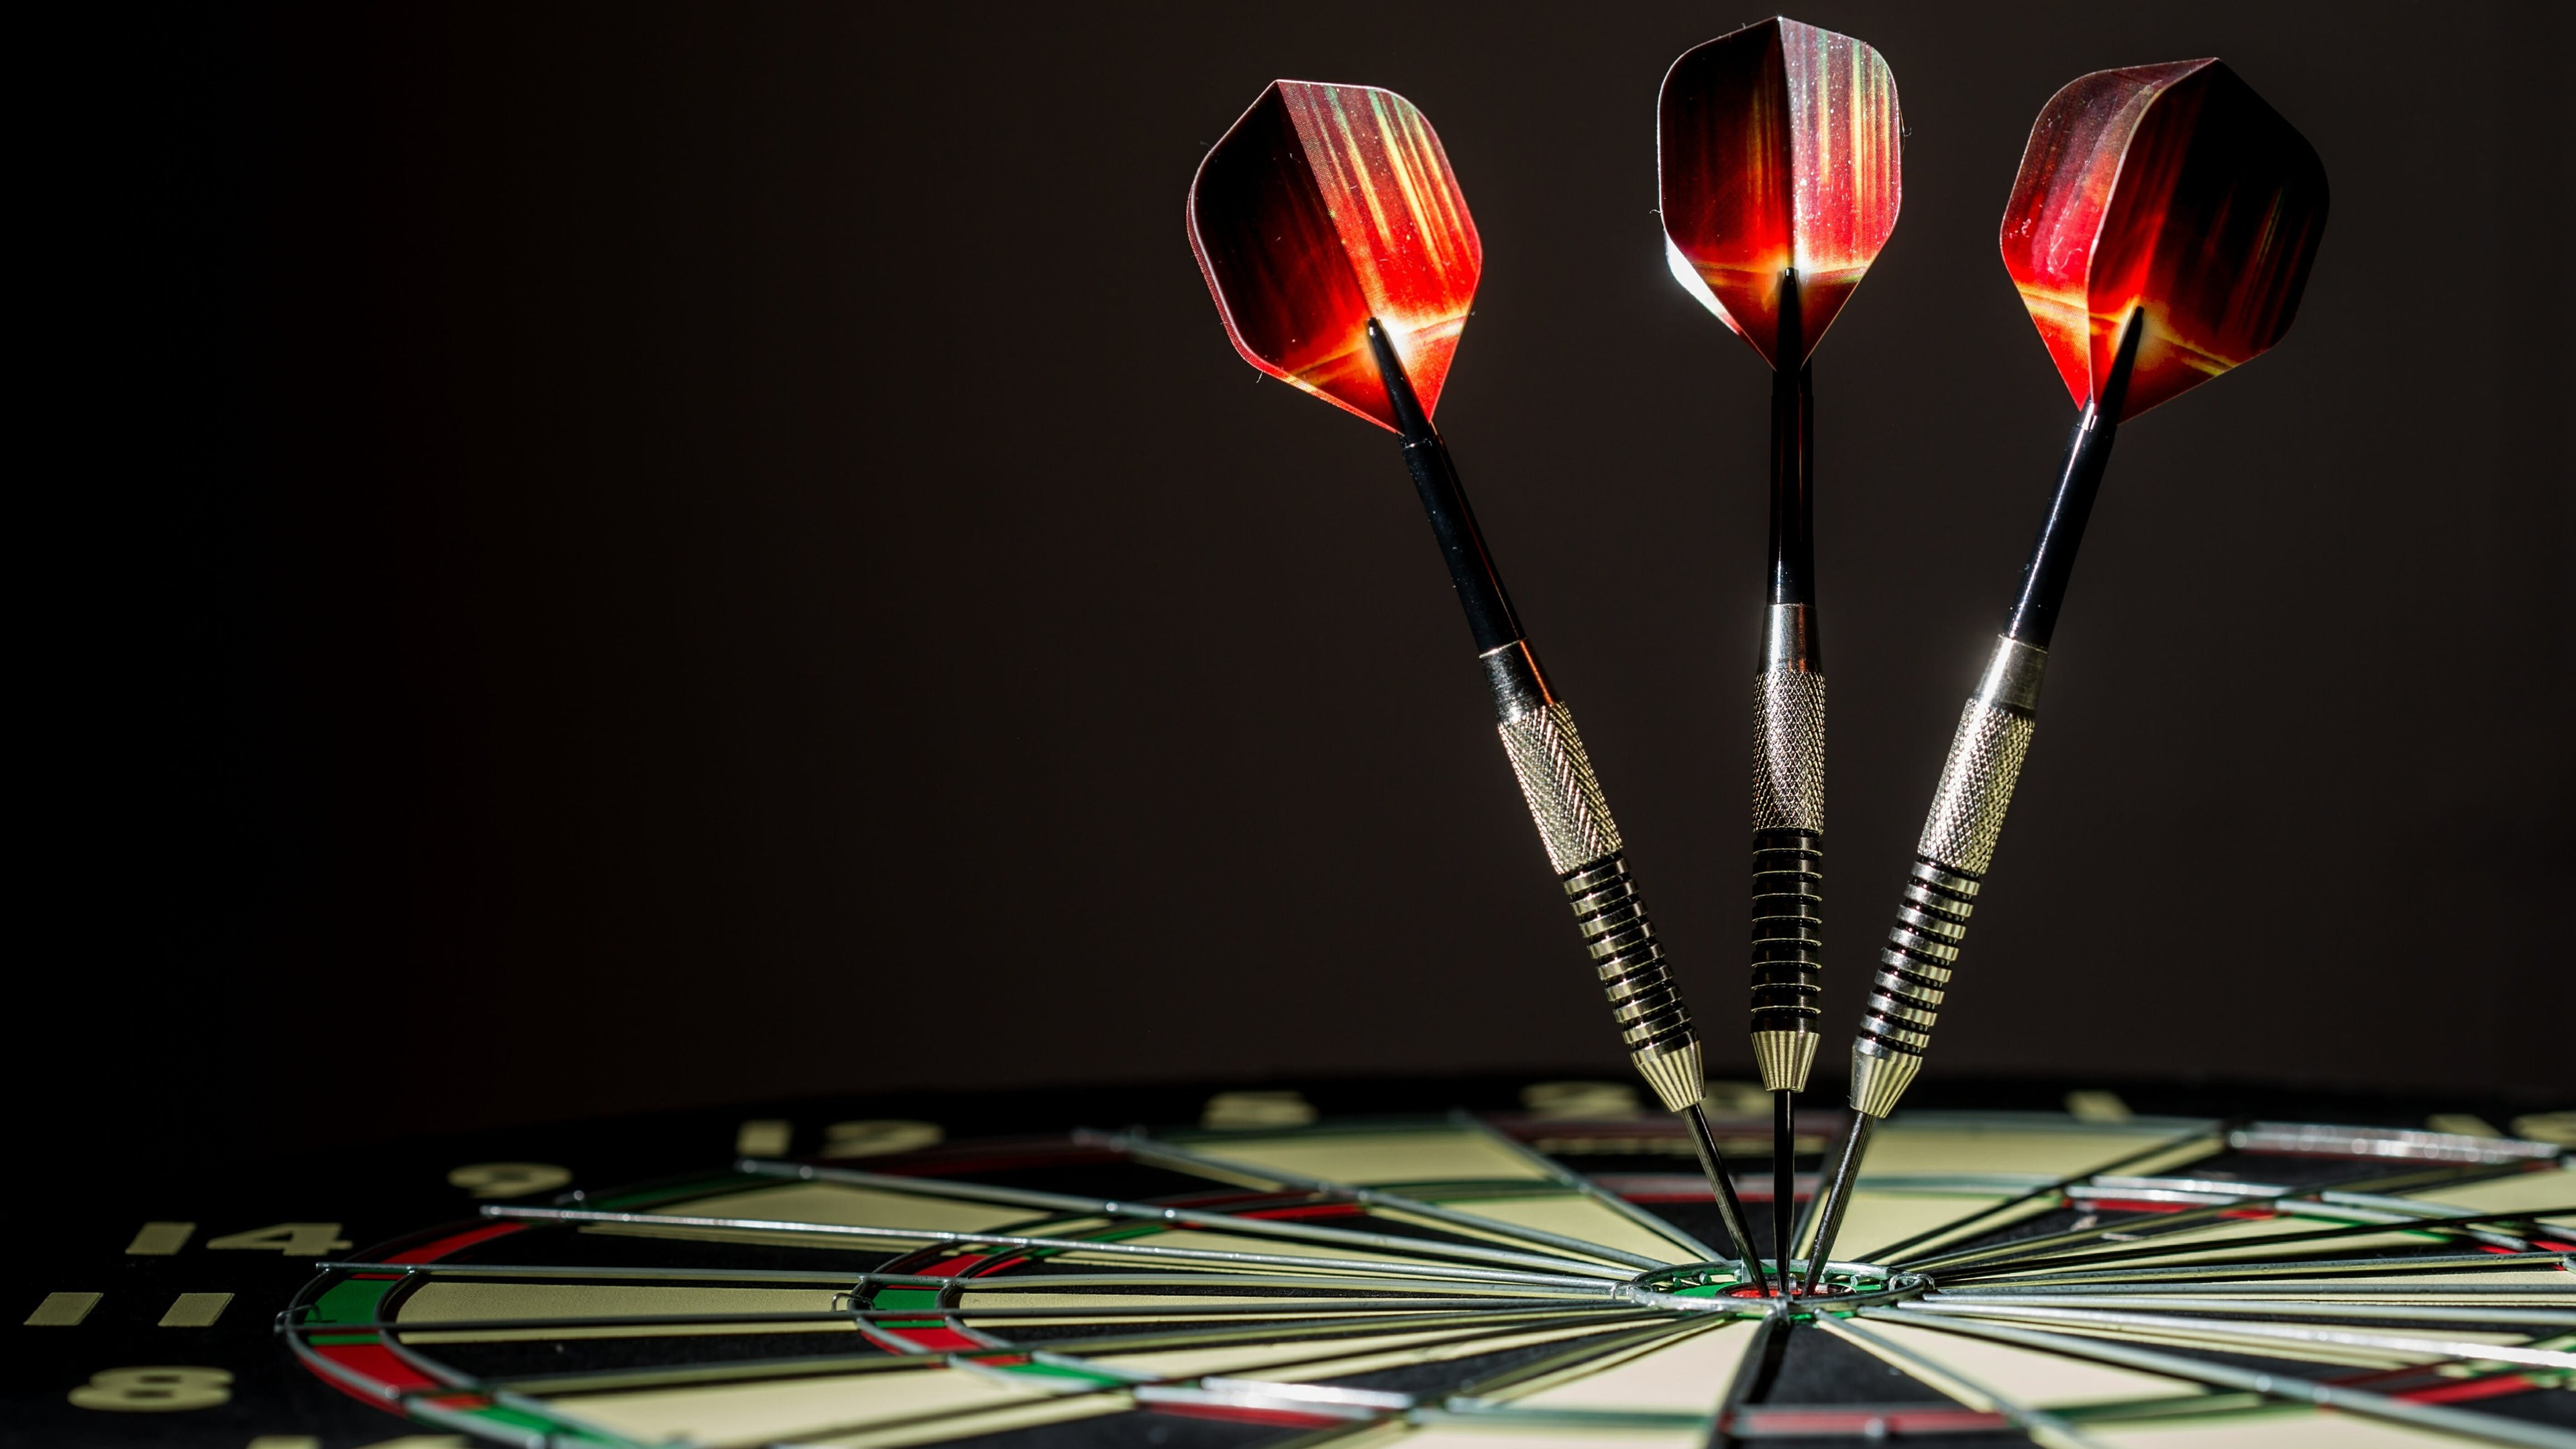 Darts: Points, Two common lengths, 32 and 41 mm, Dart-throwing. 3840x2160 4K Wallpaper.